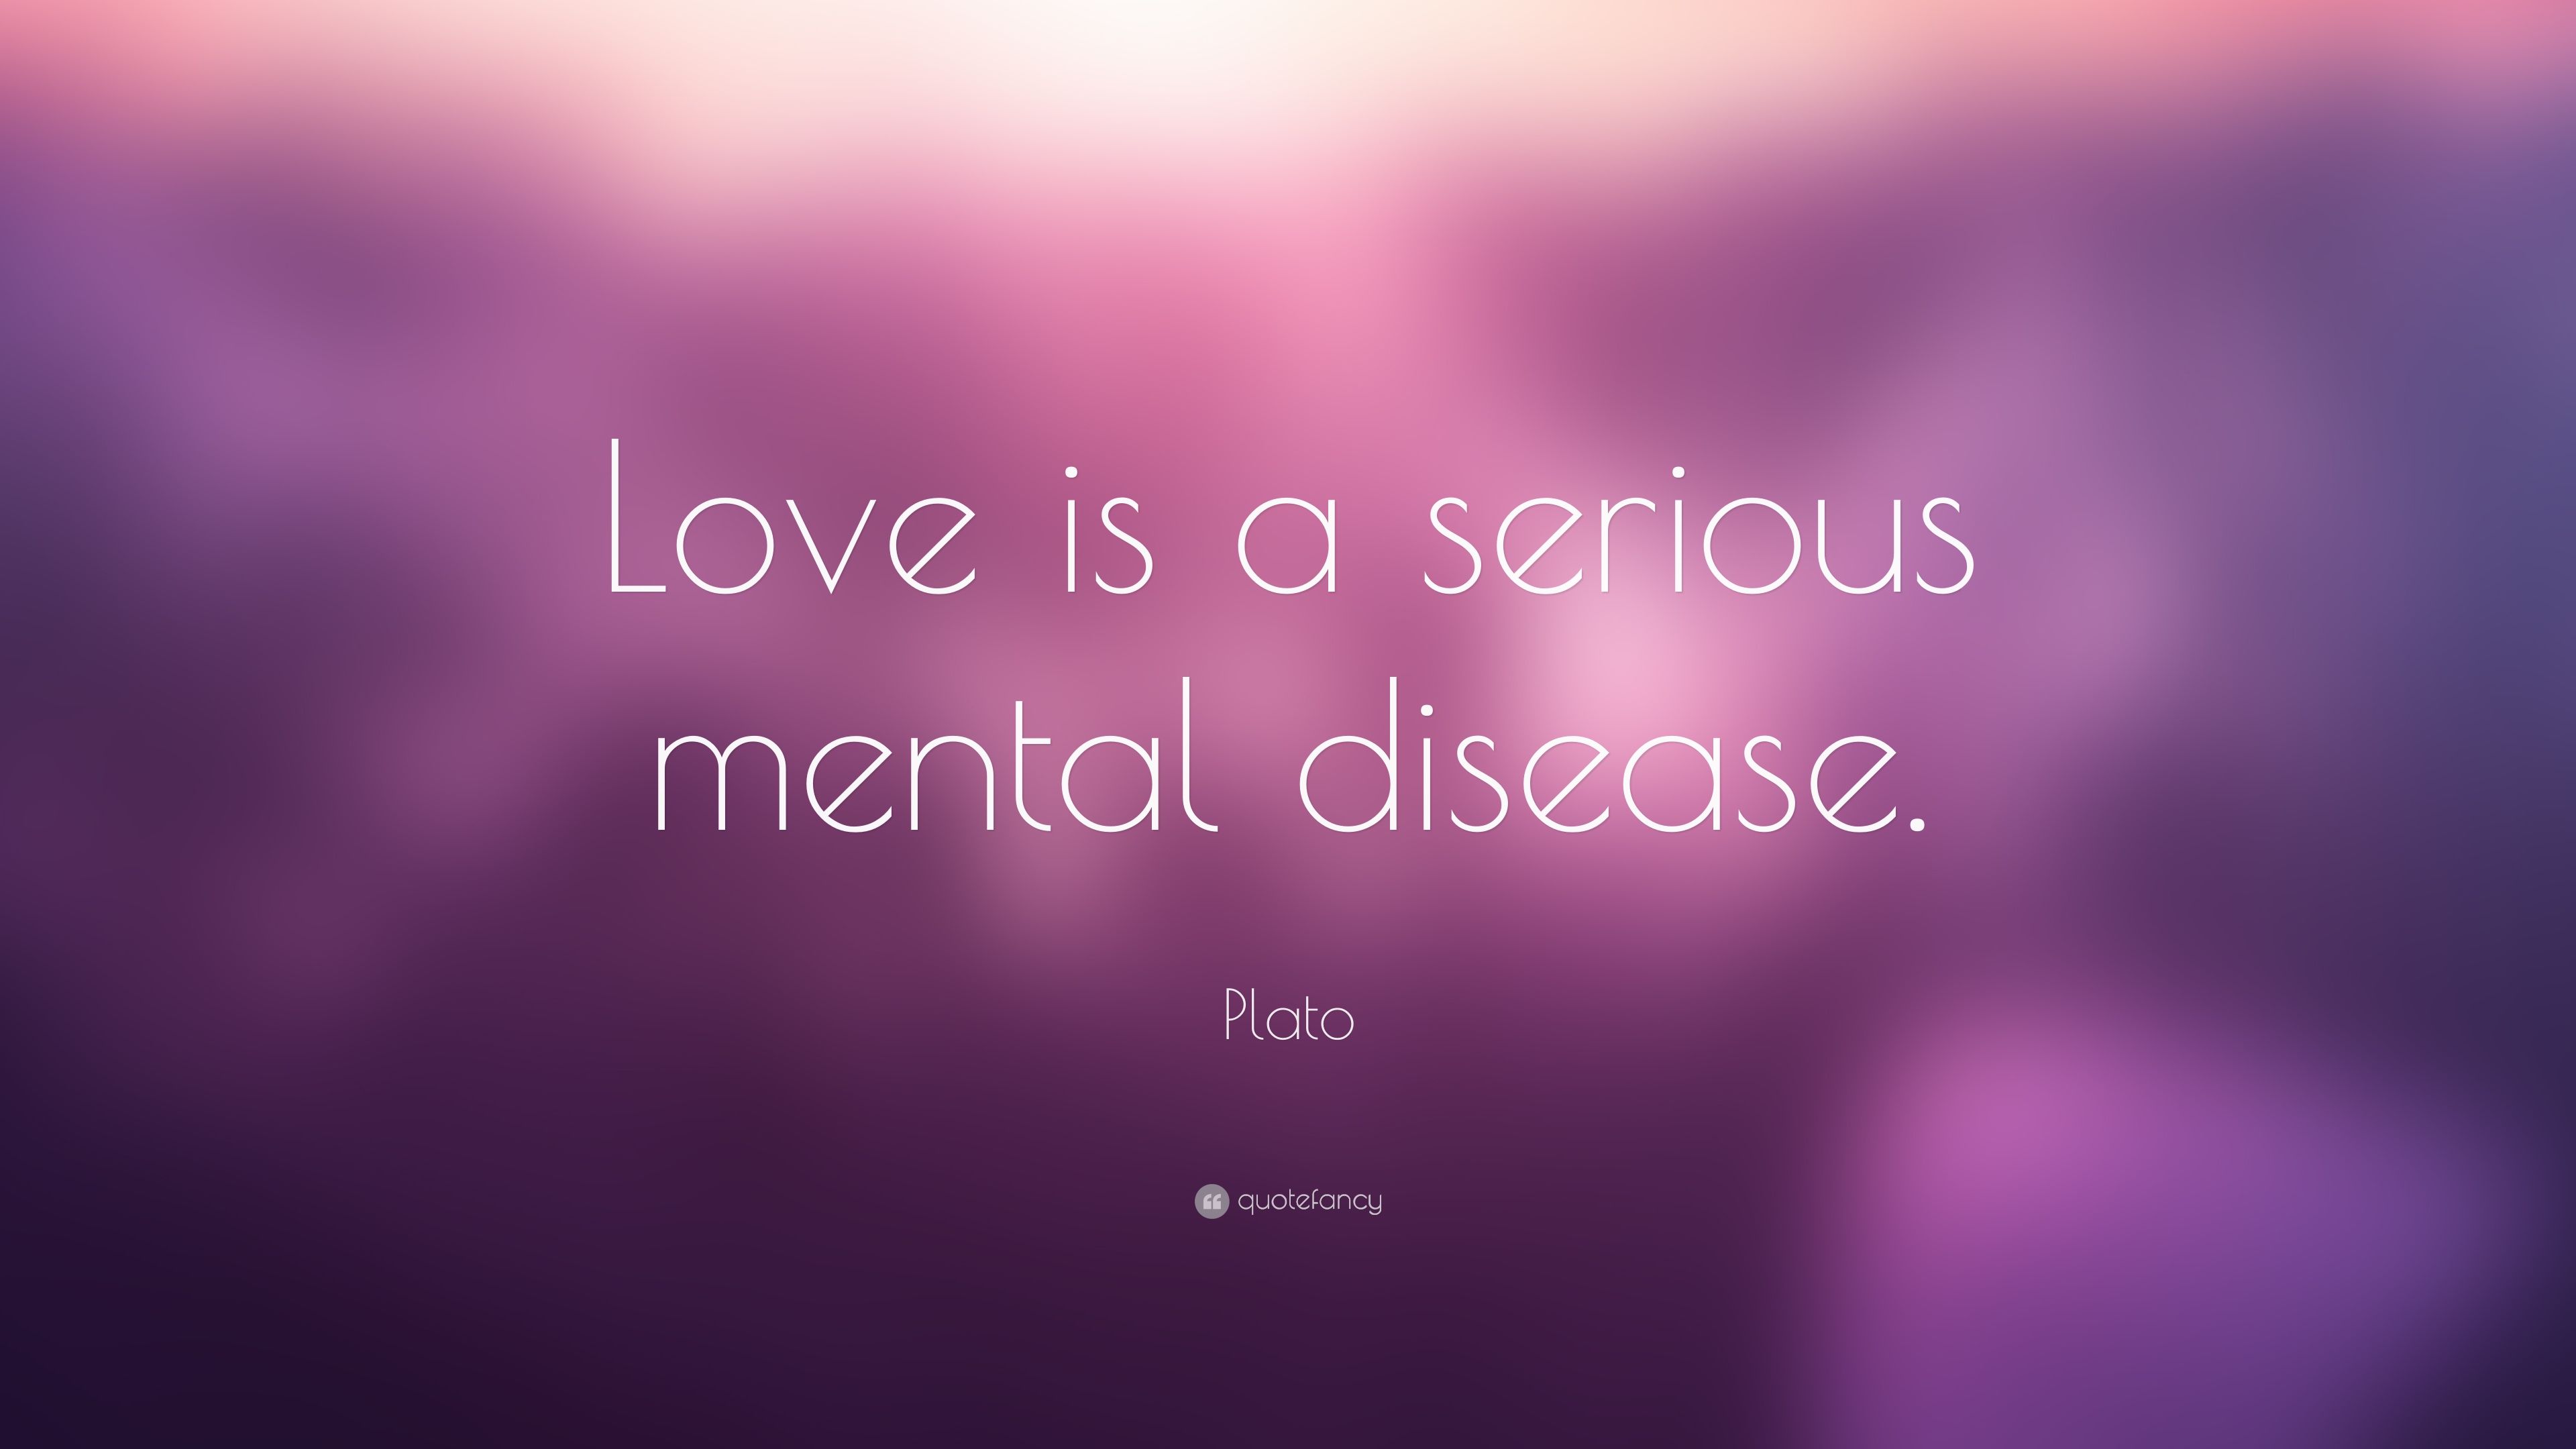 Plato Quote: “Love is a serious mental disease.” 15 wallpaper